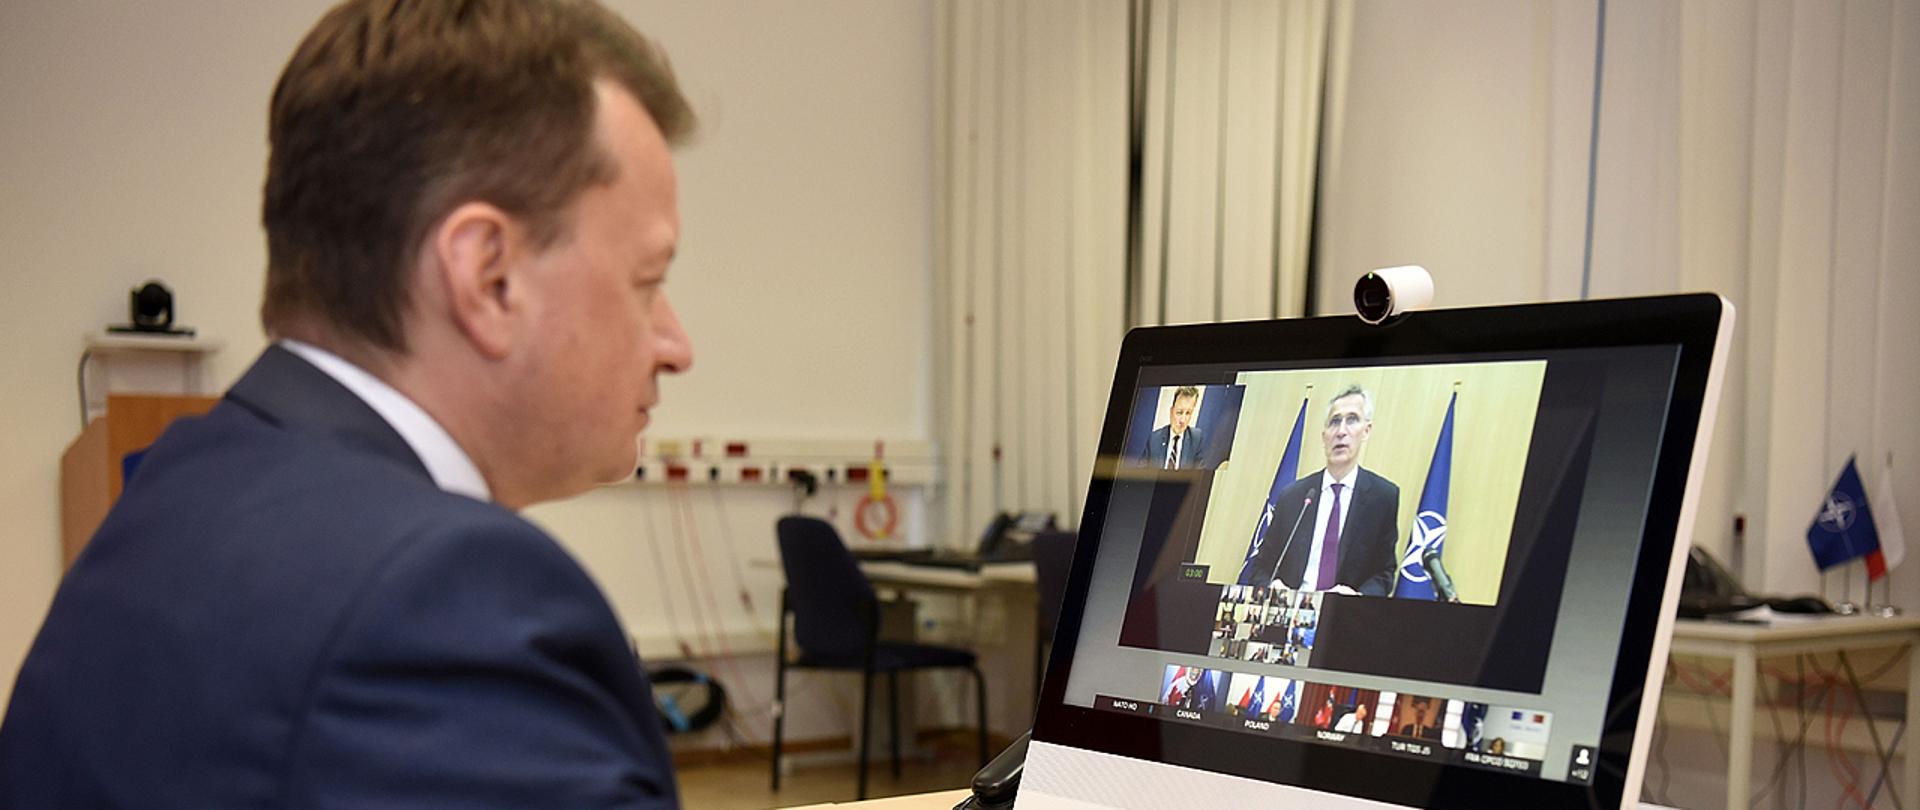 Minister Mariusz Błaszczak takes part in the North Atlantic Council teleconference. On the computer screen NATO Secretary General Jens Stoltenberg.